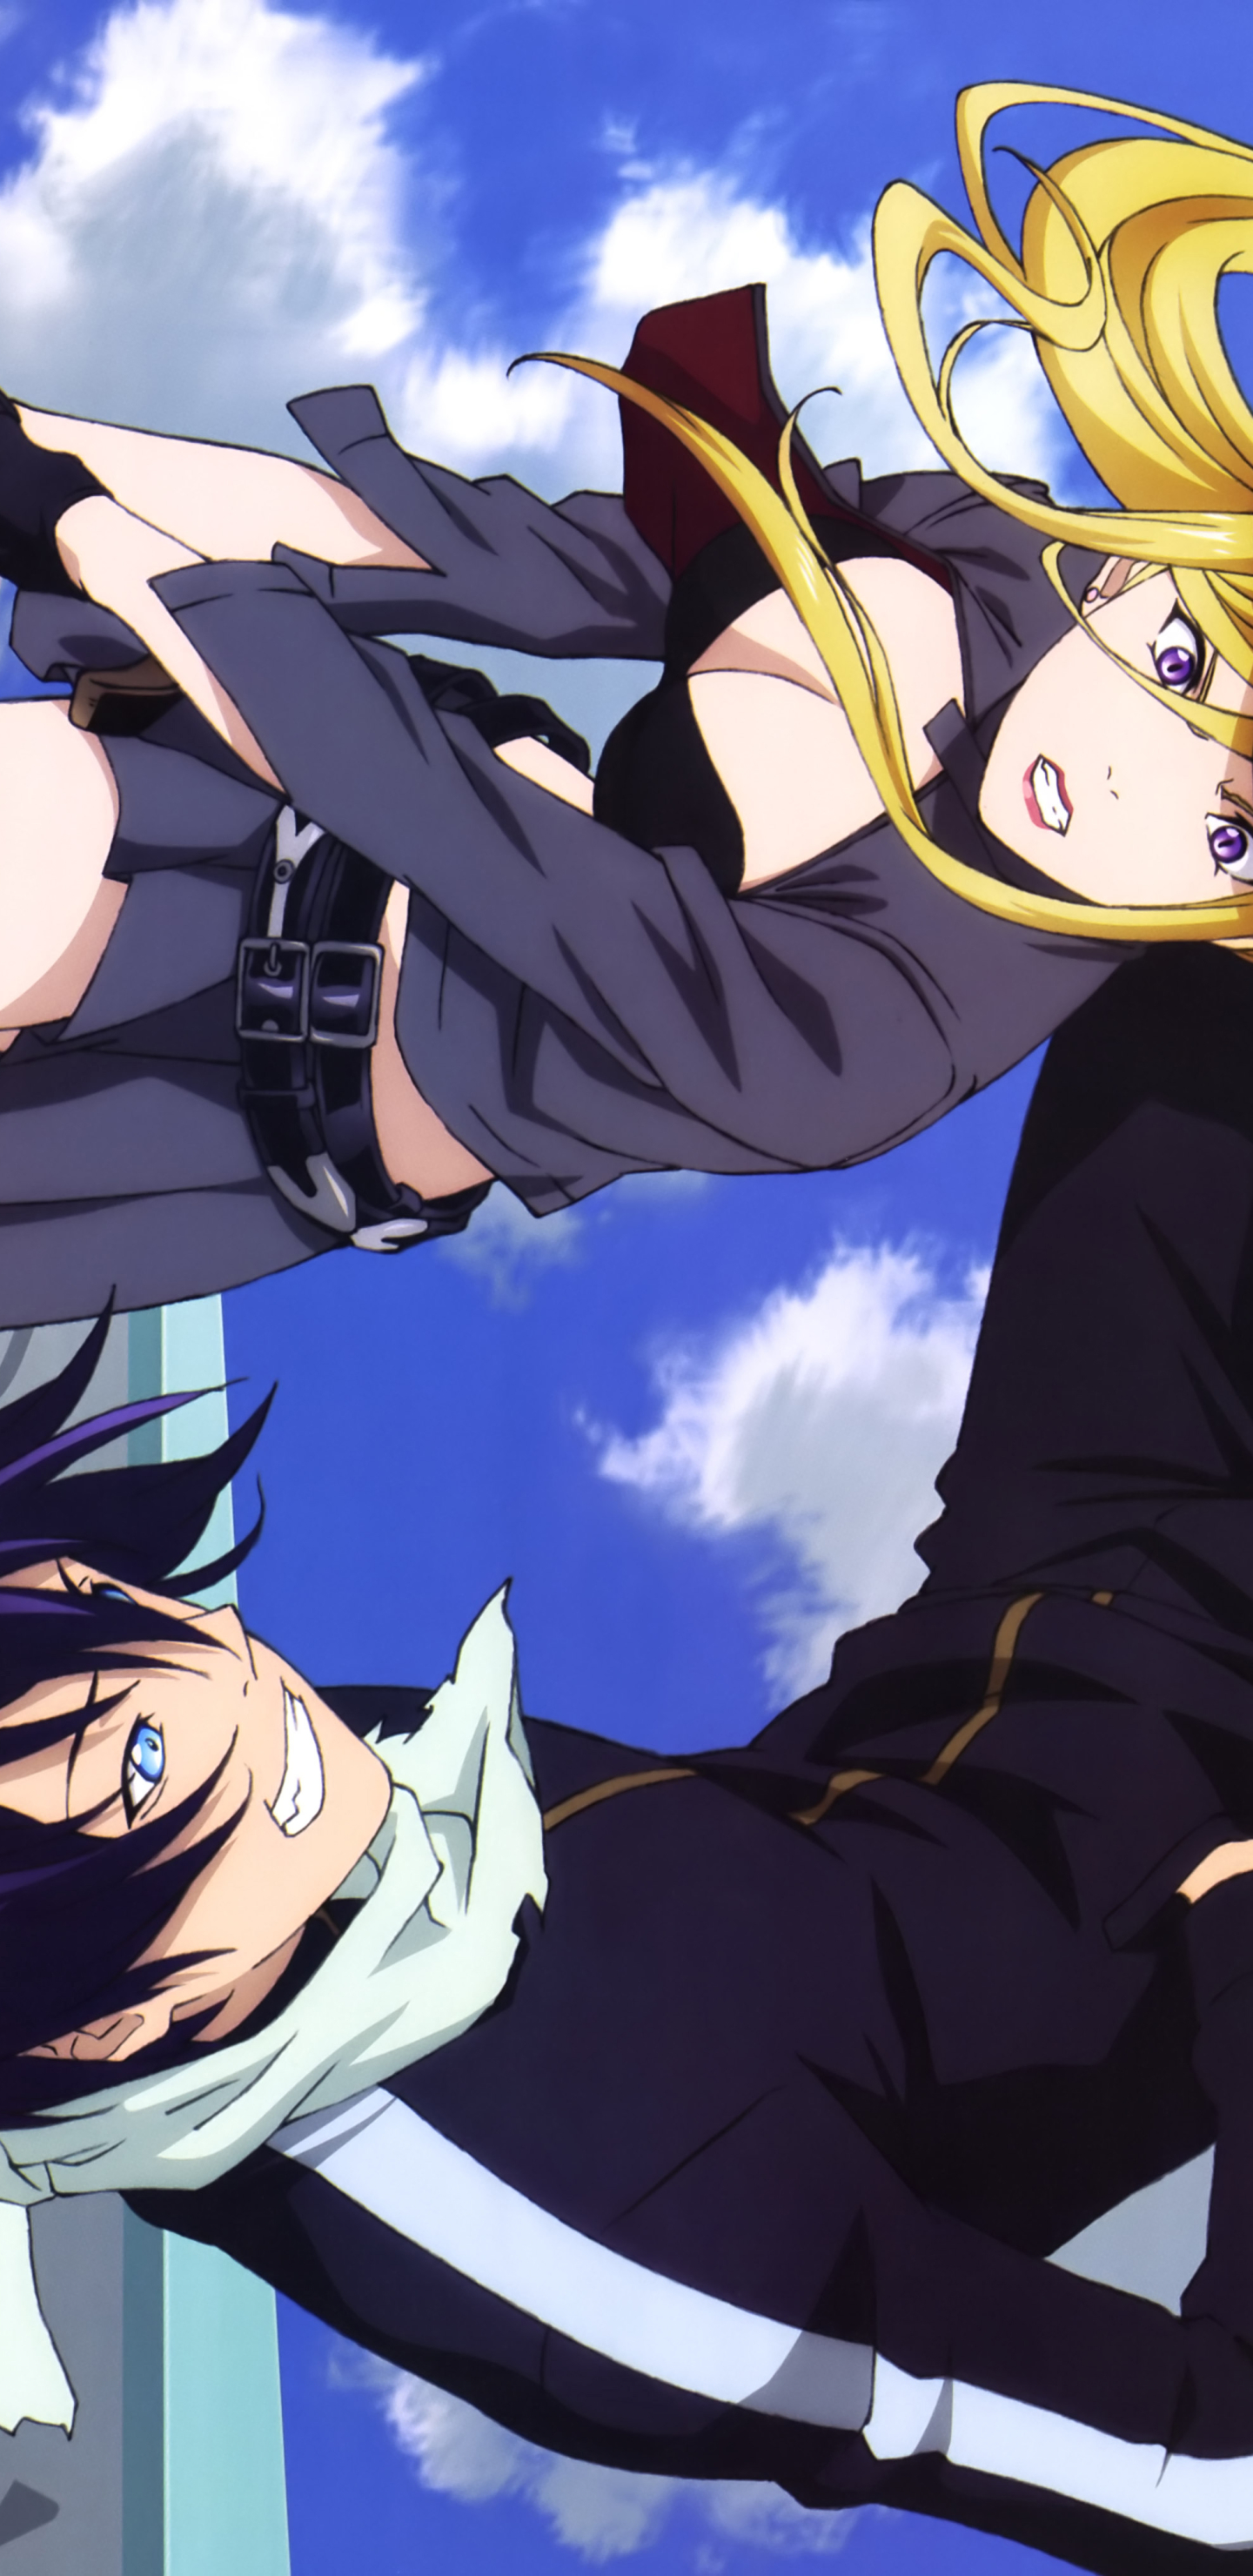 Noragami Wallpaper For Iphone